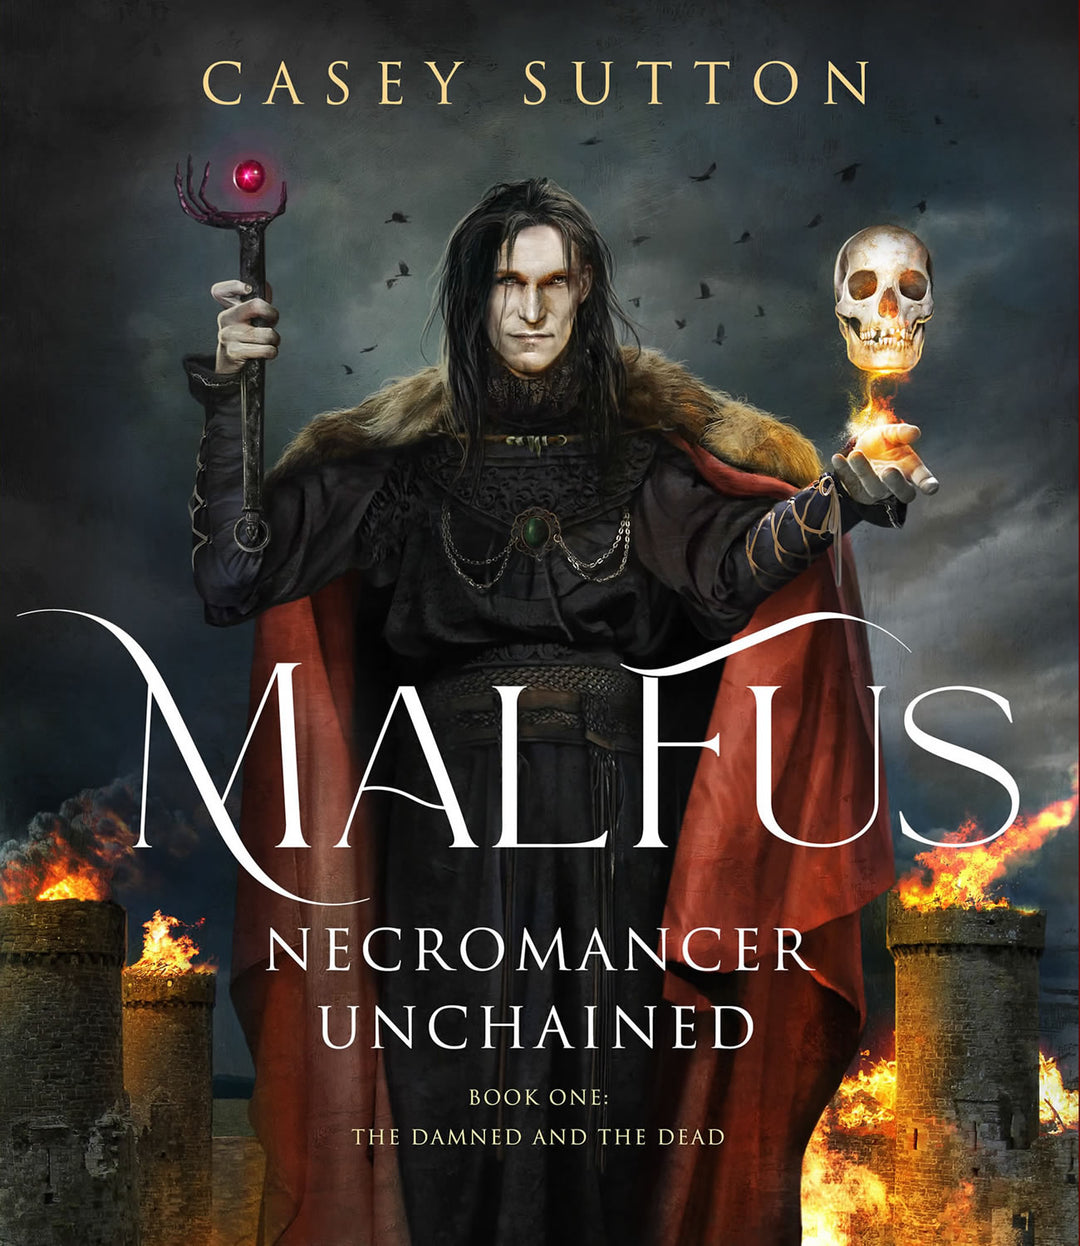 Malfus: Necromancer Unchained - Signed Paperback